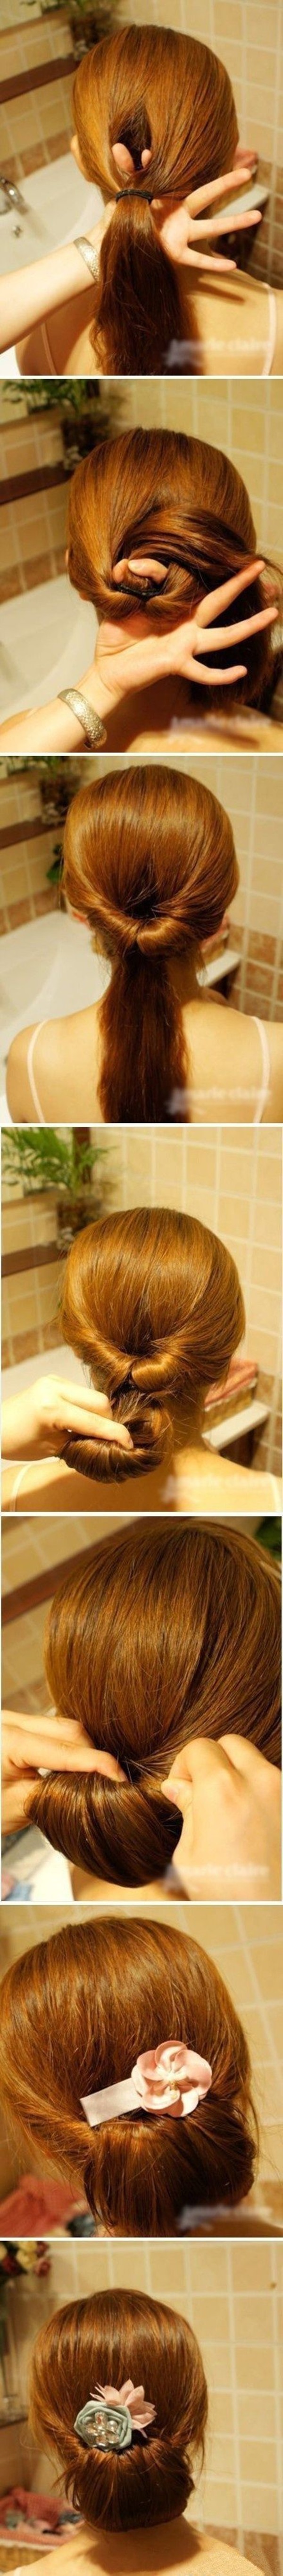 Simple Five Minute Hairstyles (15)